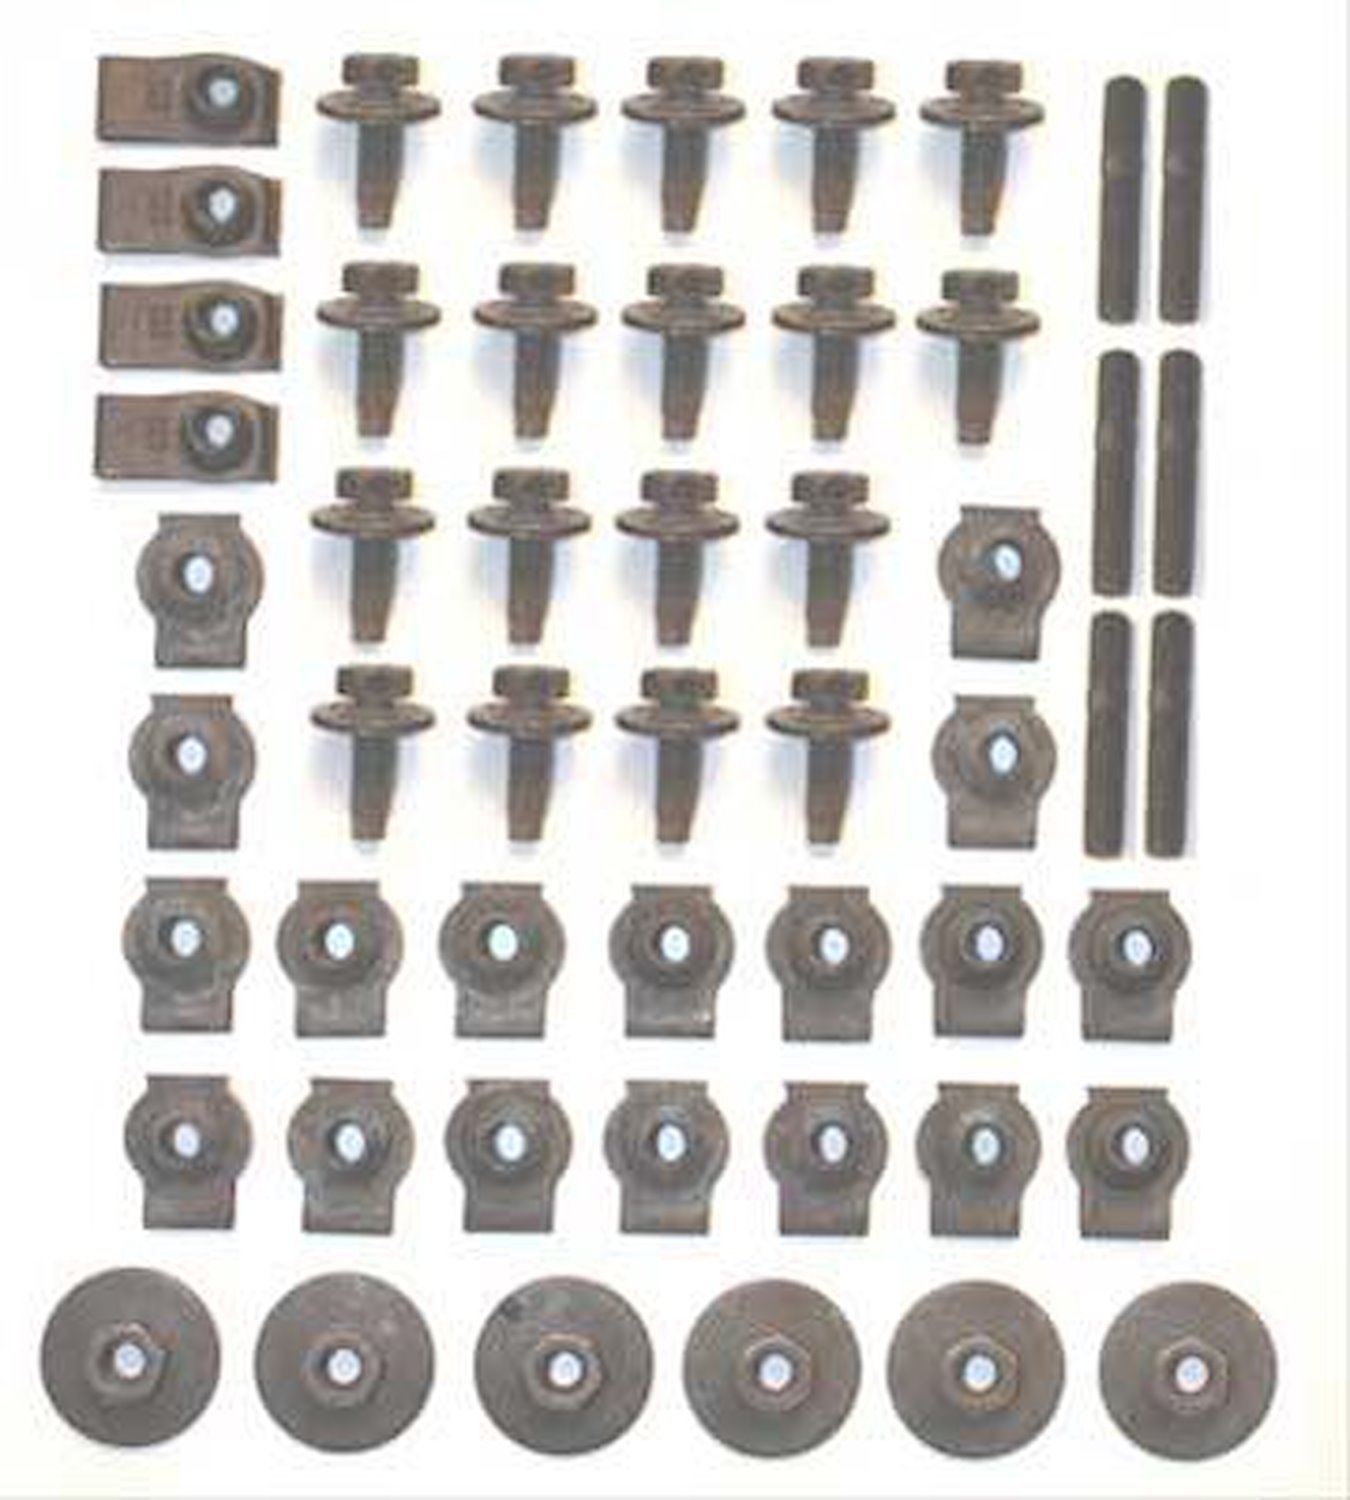 X203-1570-S Fender Bolt Kit w/Studs for 1970 Dodge Challenger, Plymouth Barracuda